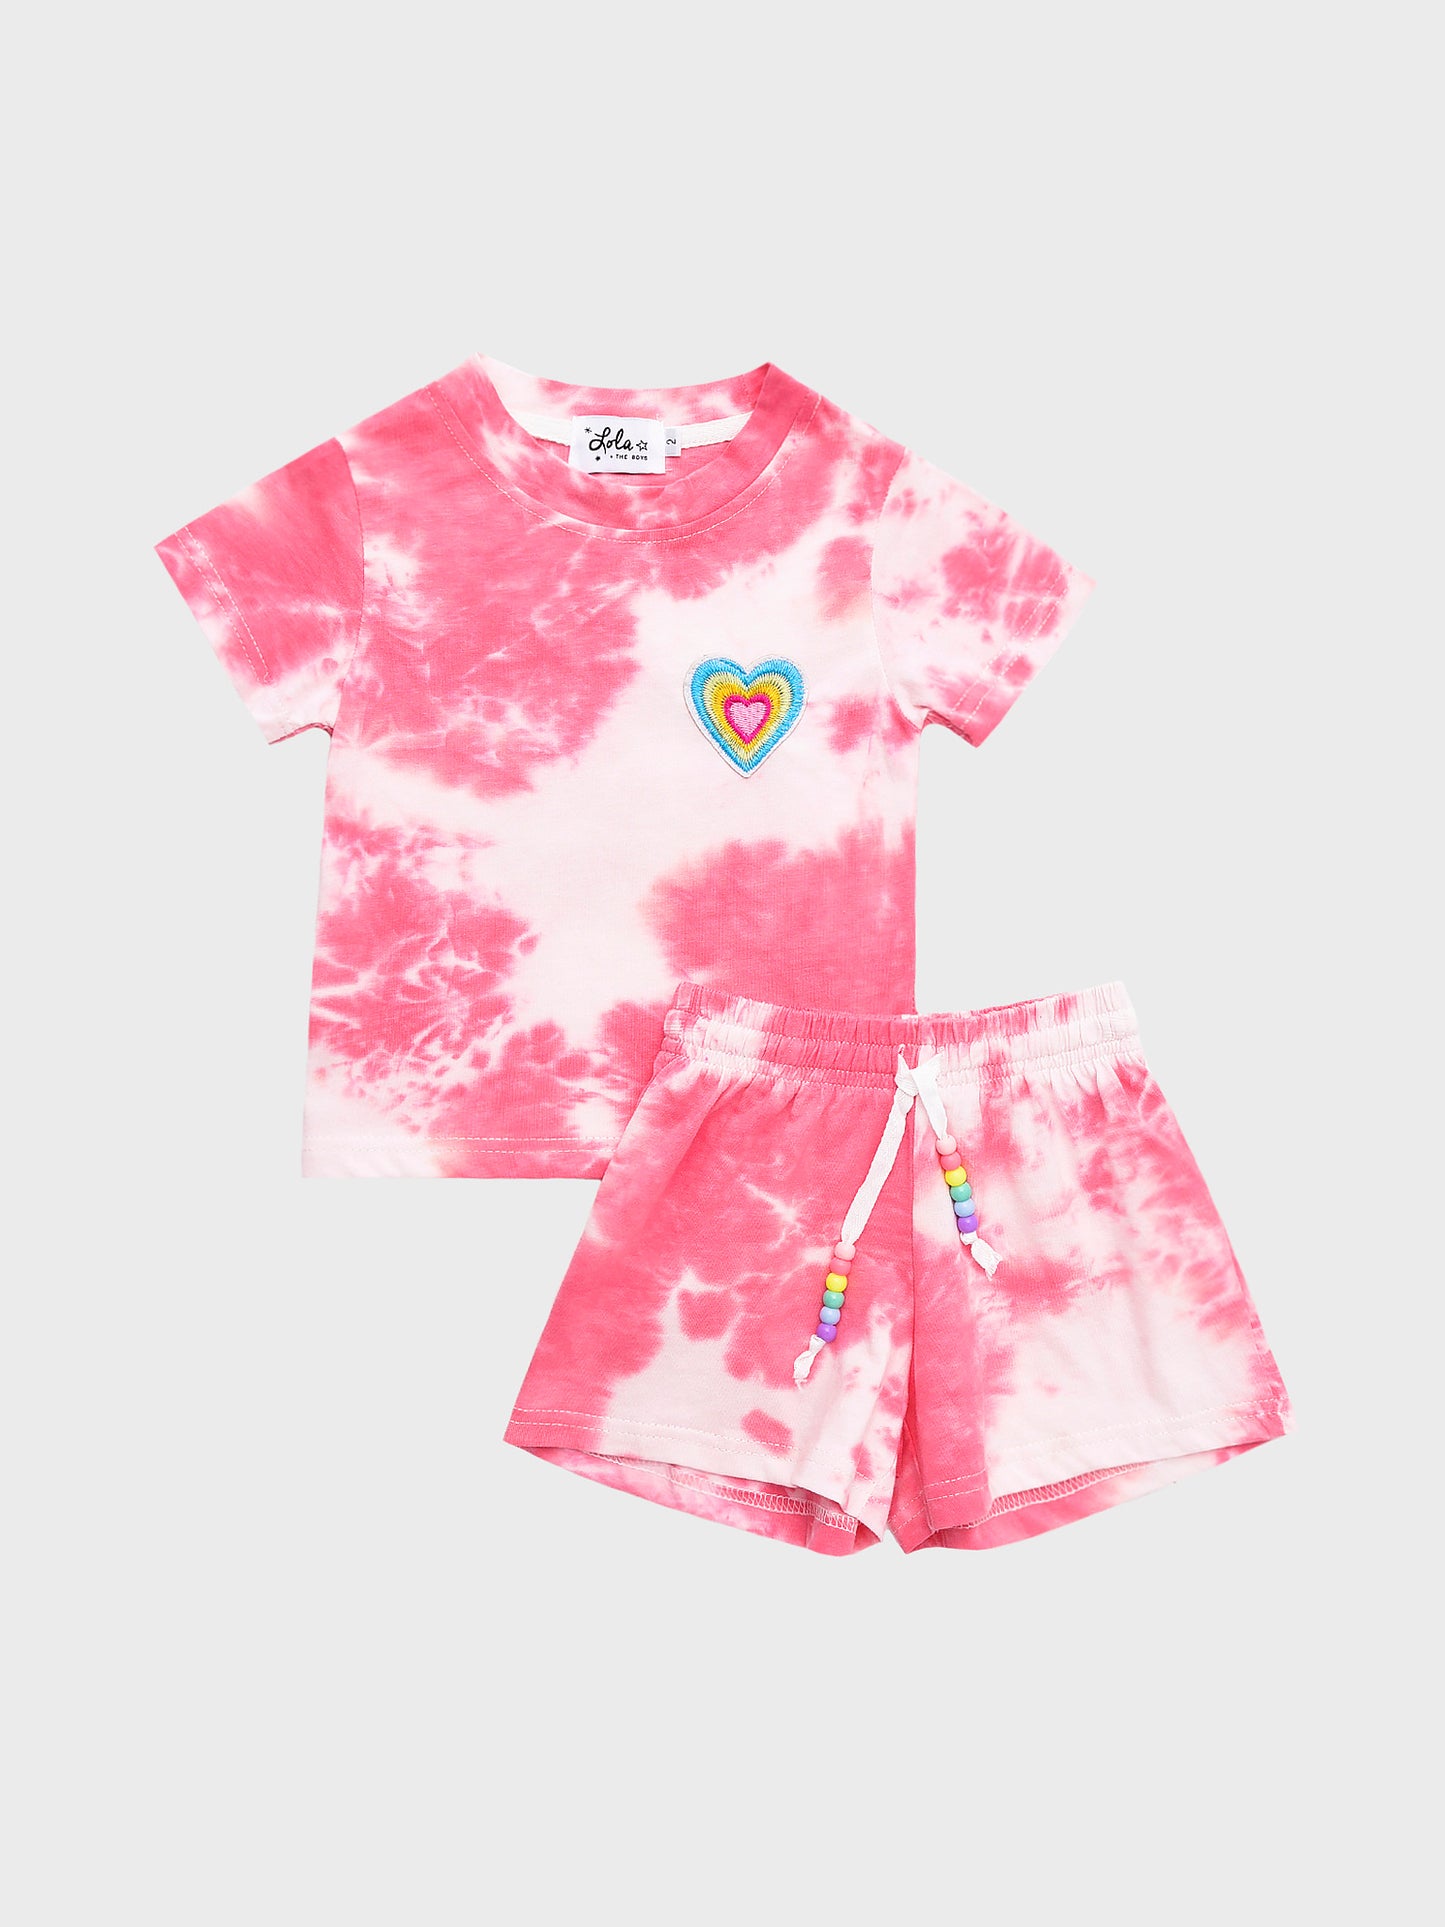 Lola And The Boys Girls' Pink Tie-Dye Short Set